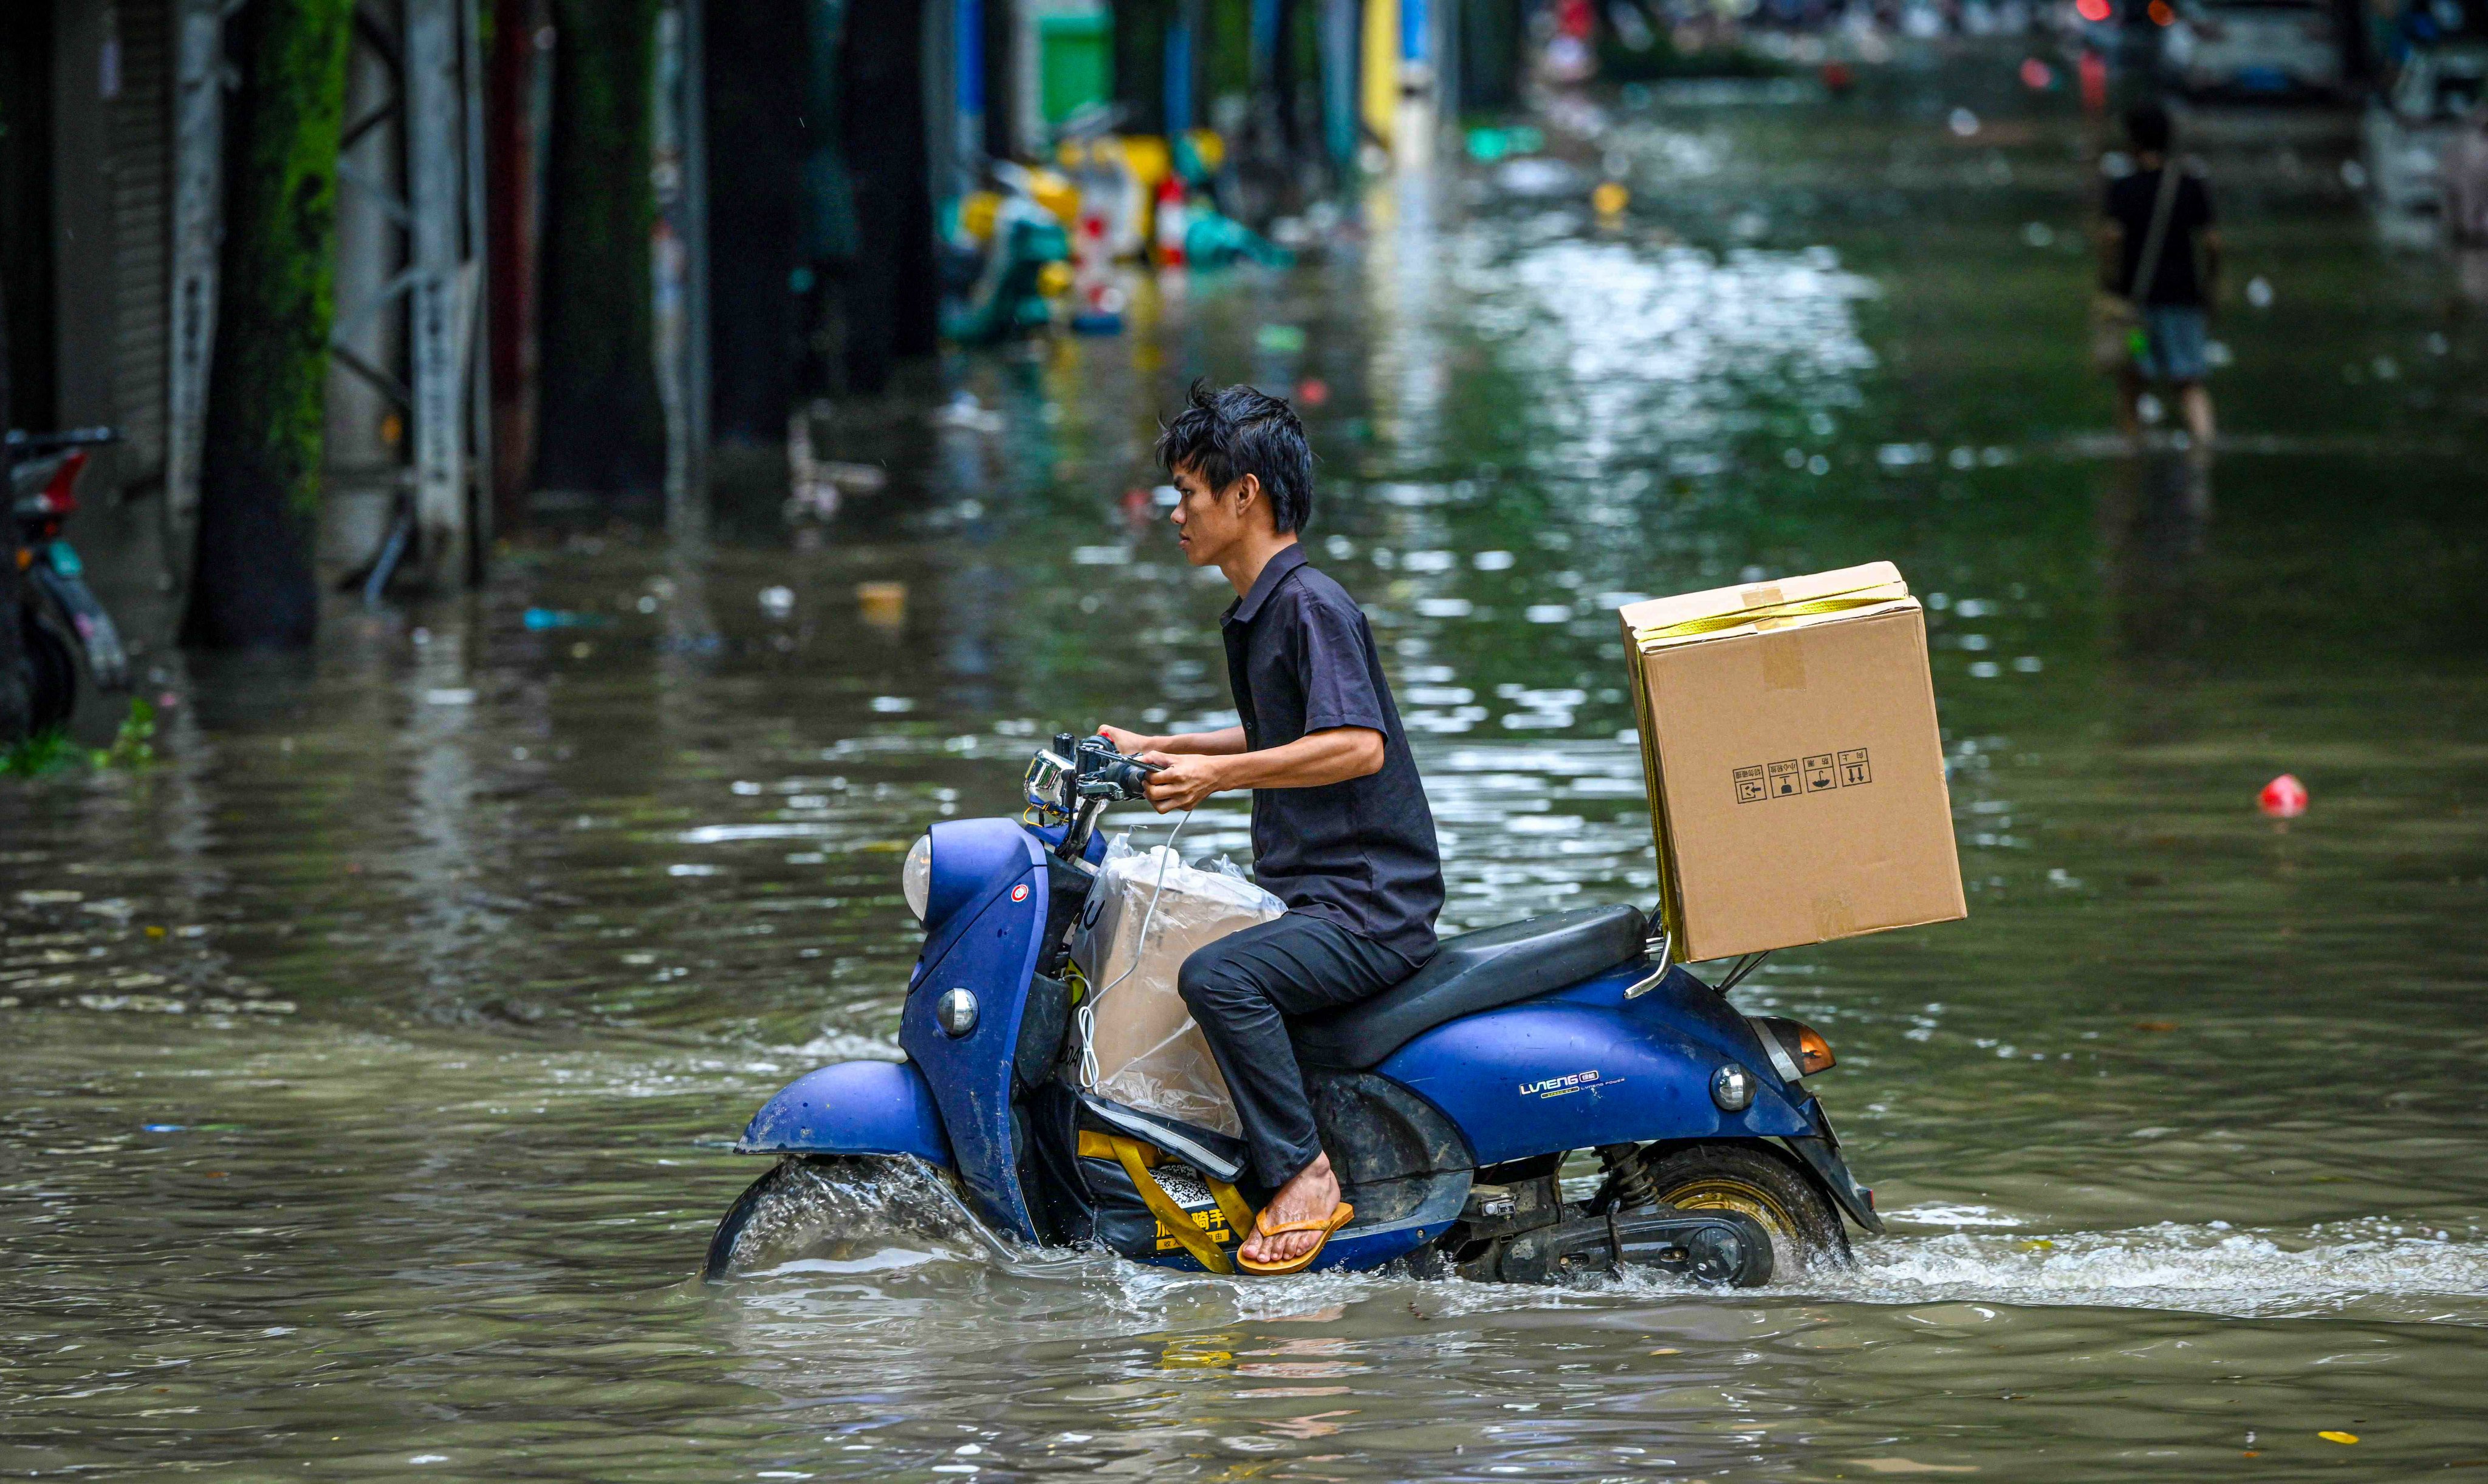 A man rides a scooter through a flooded street following heavy rain in Nanning, capital of south China’s Guangxi Zhuang autonomous region, on Sunday. Photo: AFP